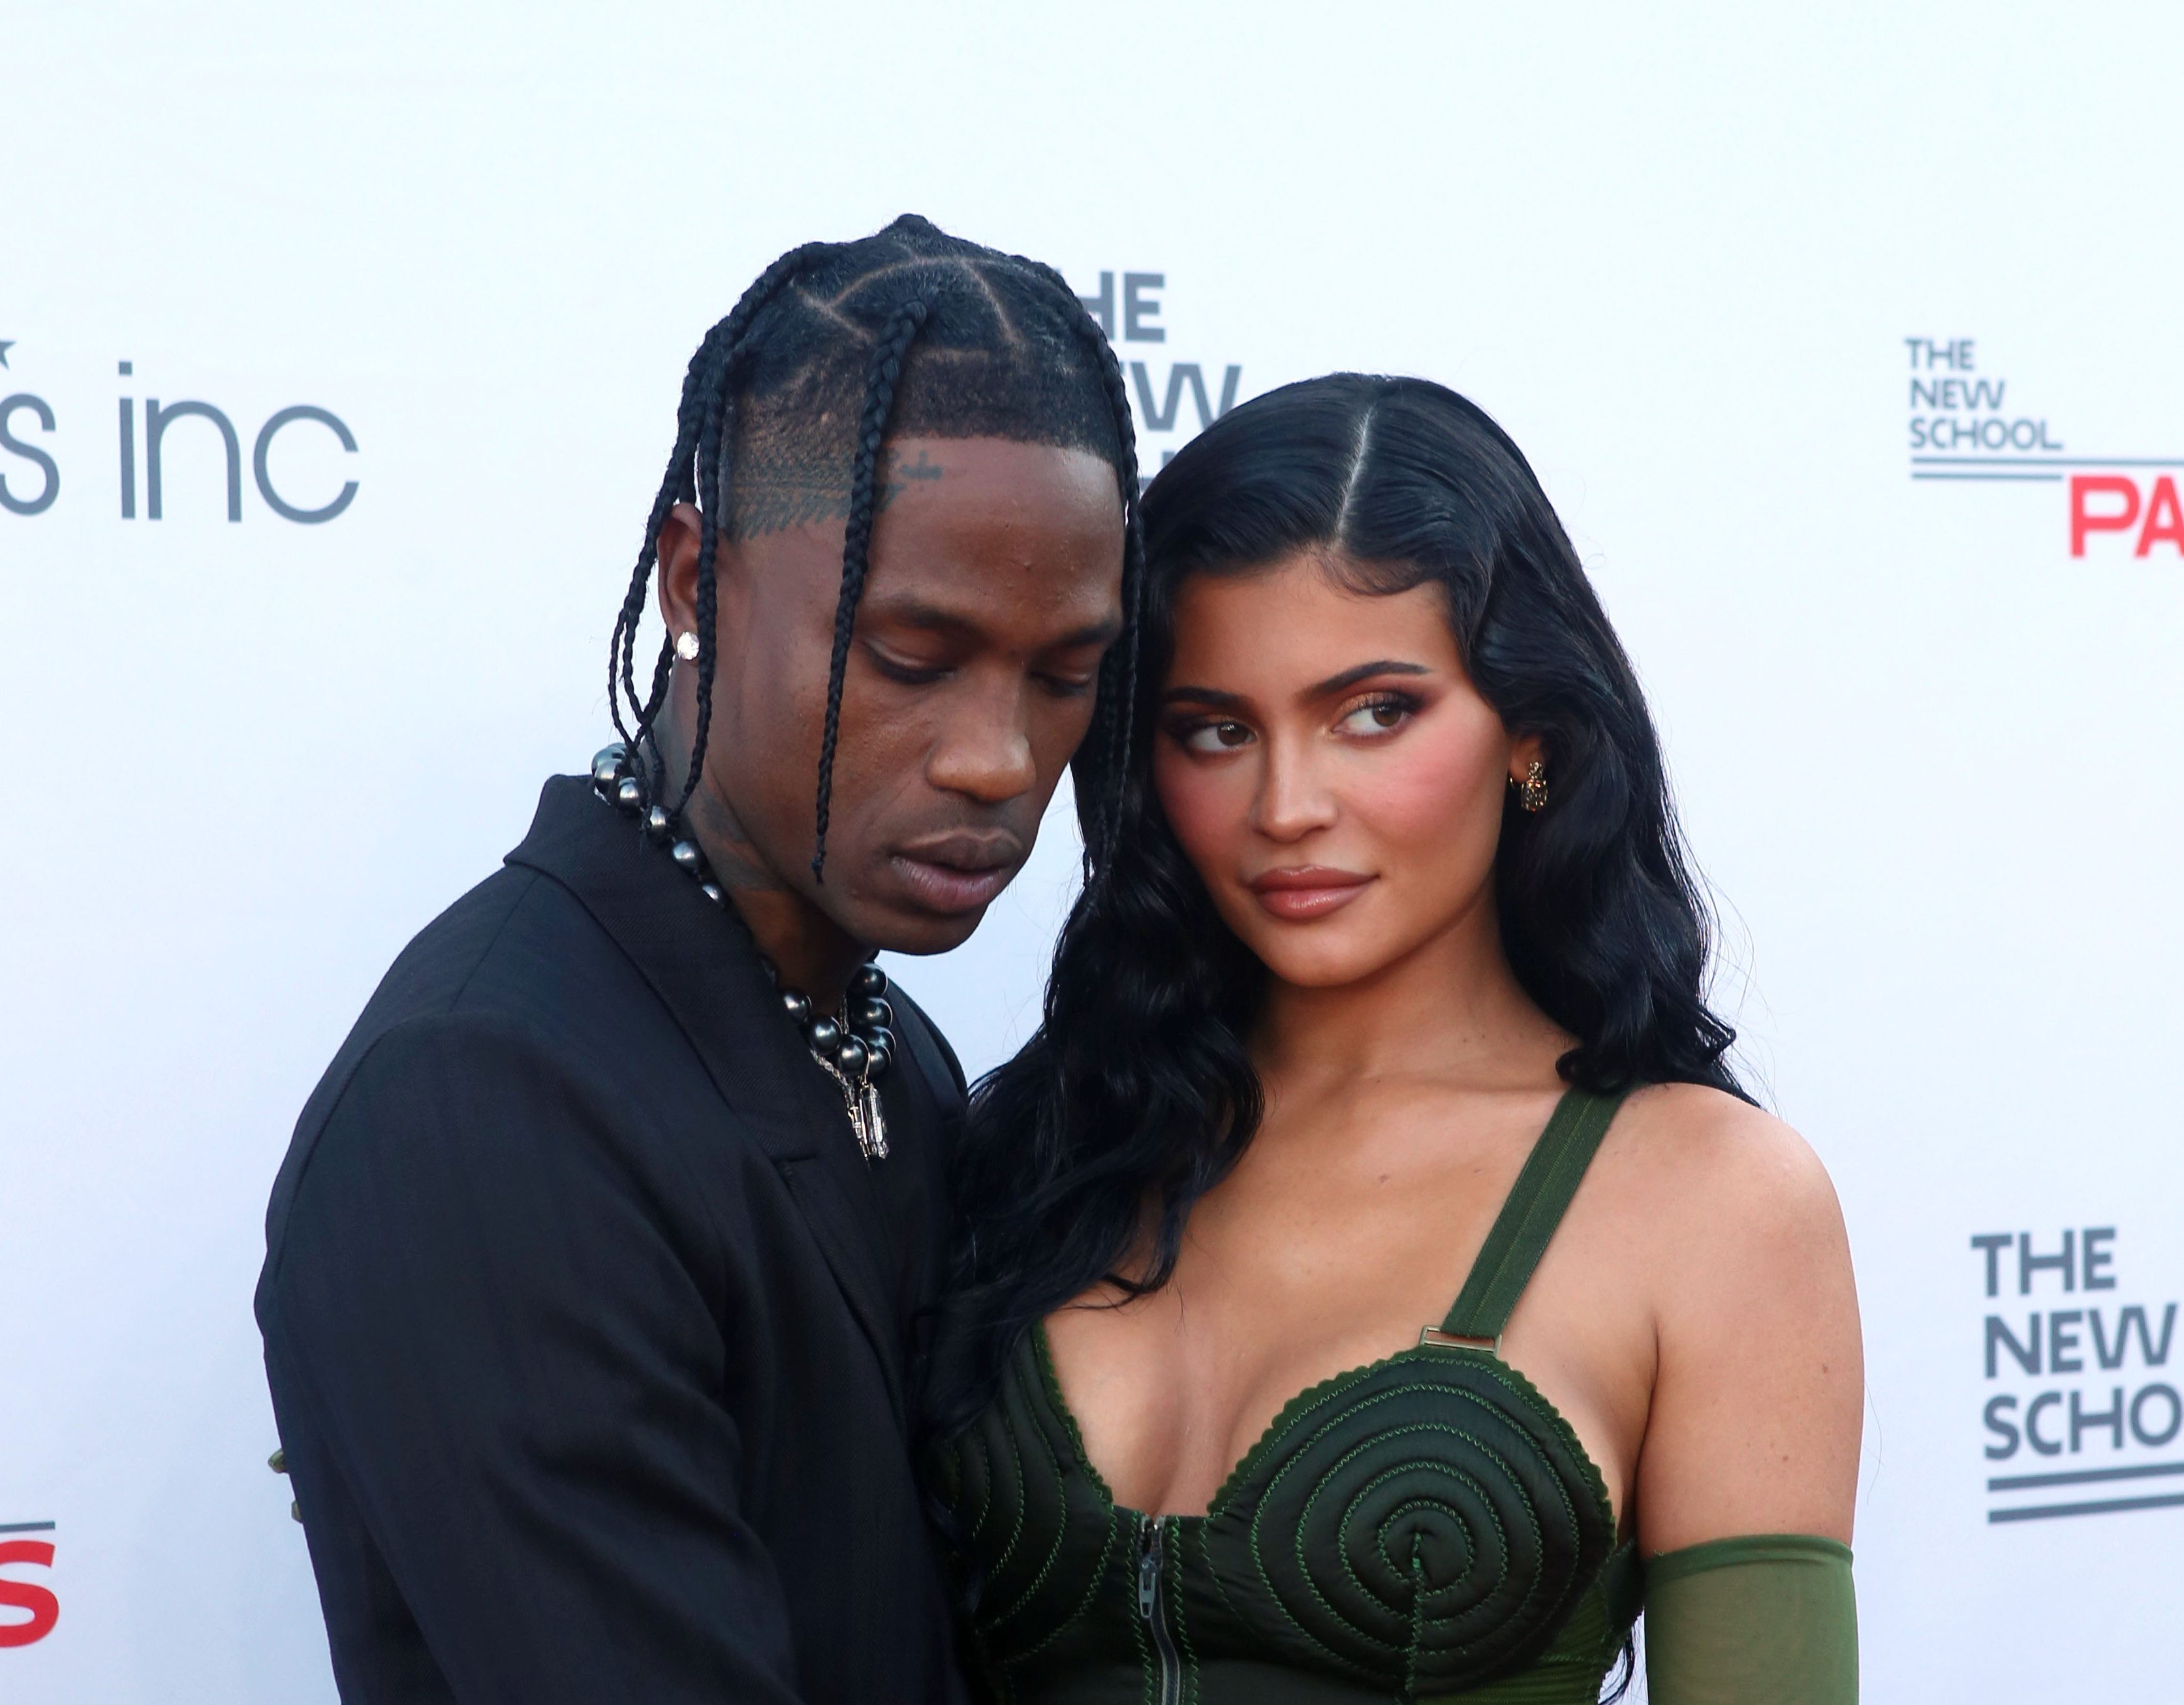 ‘W Magazine’ Apparently Scrambling To Stop Travis Scott And Kylie Jenner Cover